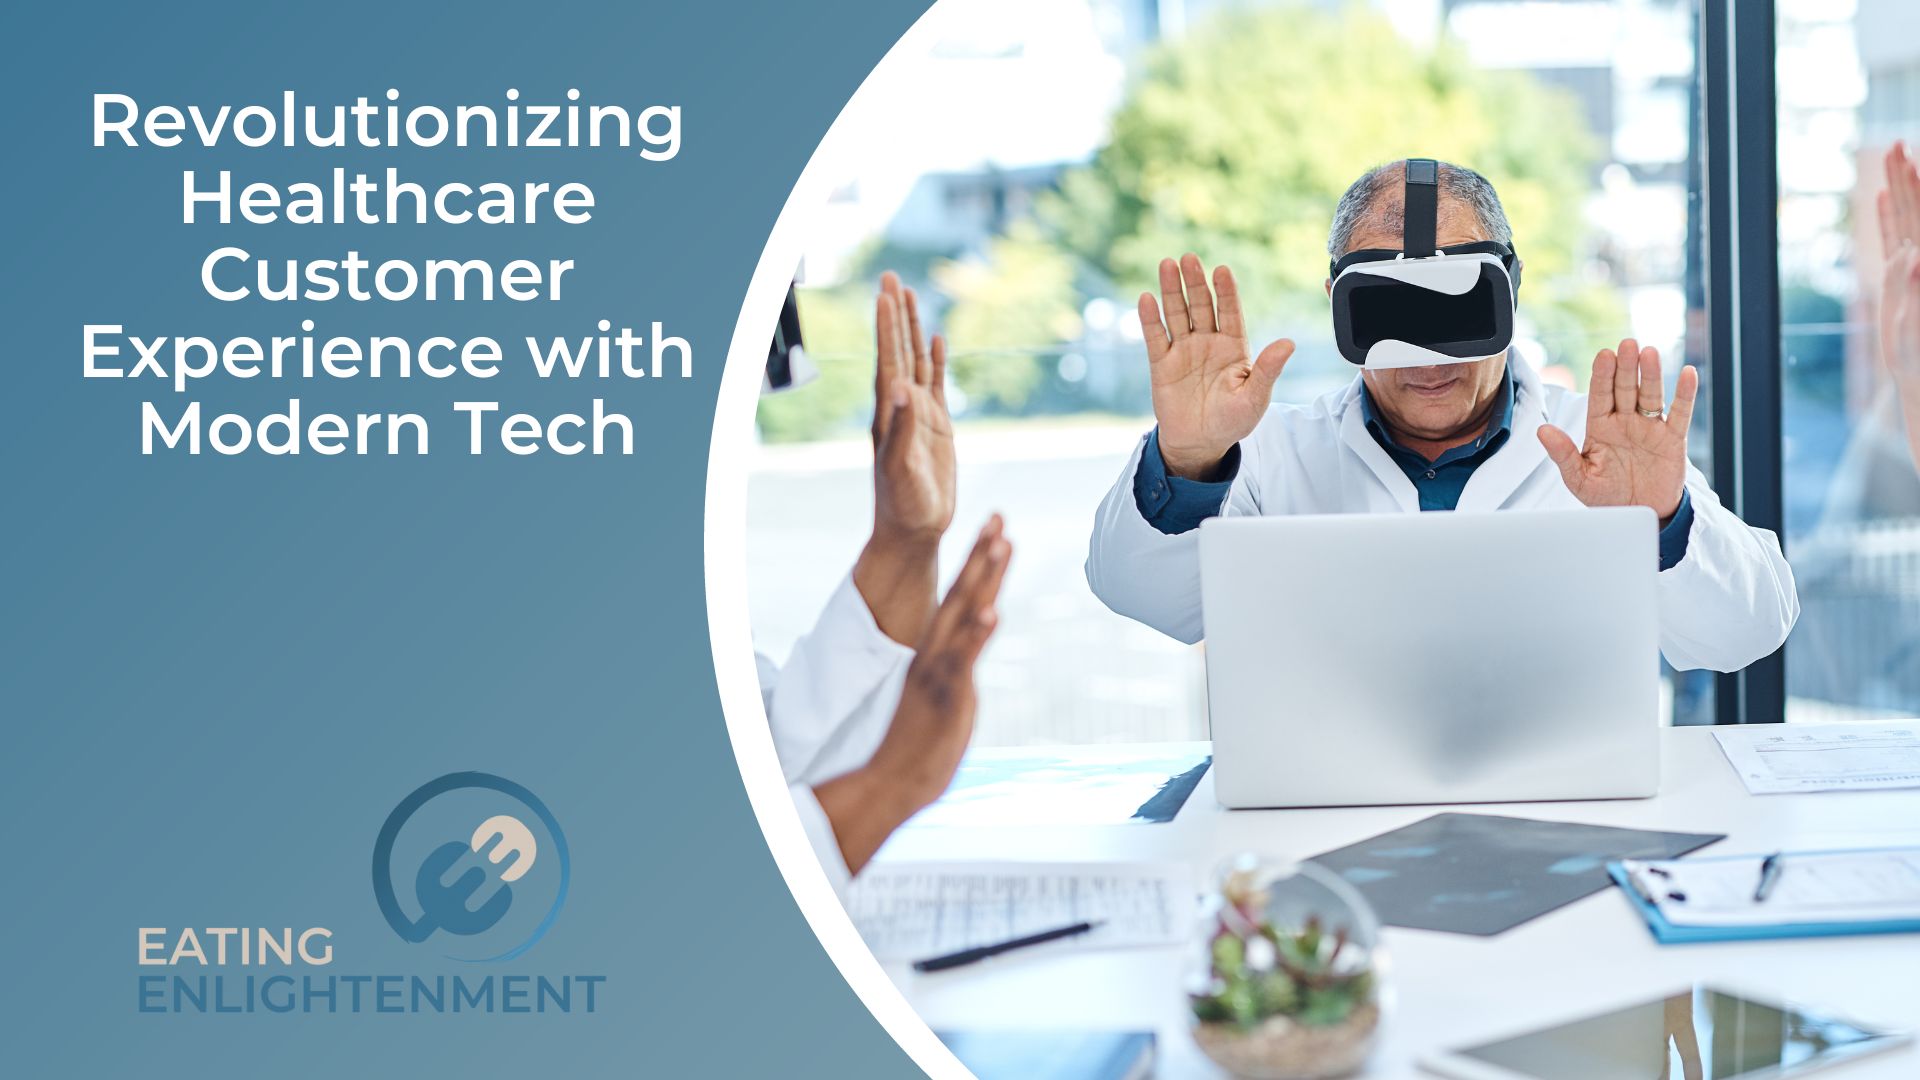 Revolutionizing Healthcare Customer Experience with Modern Tech